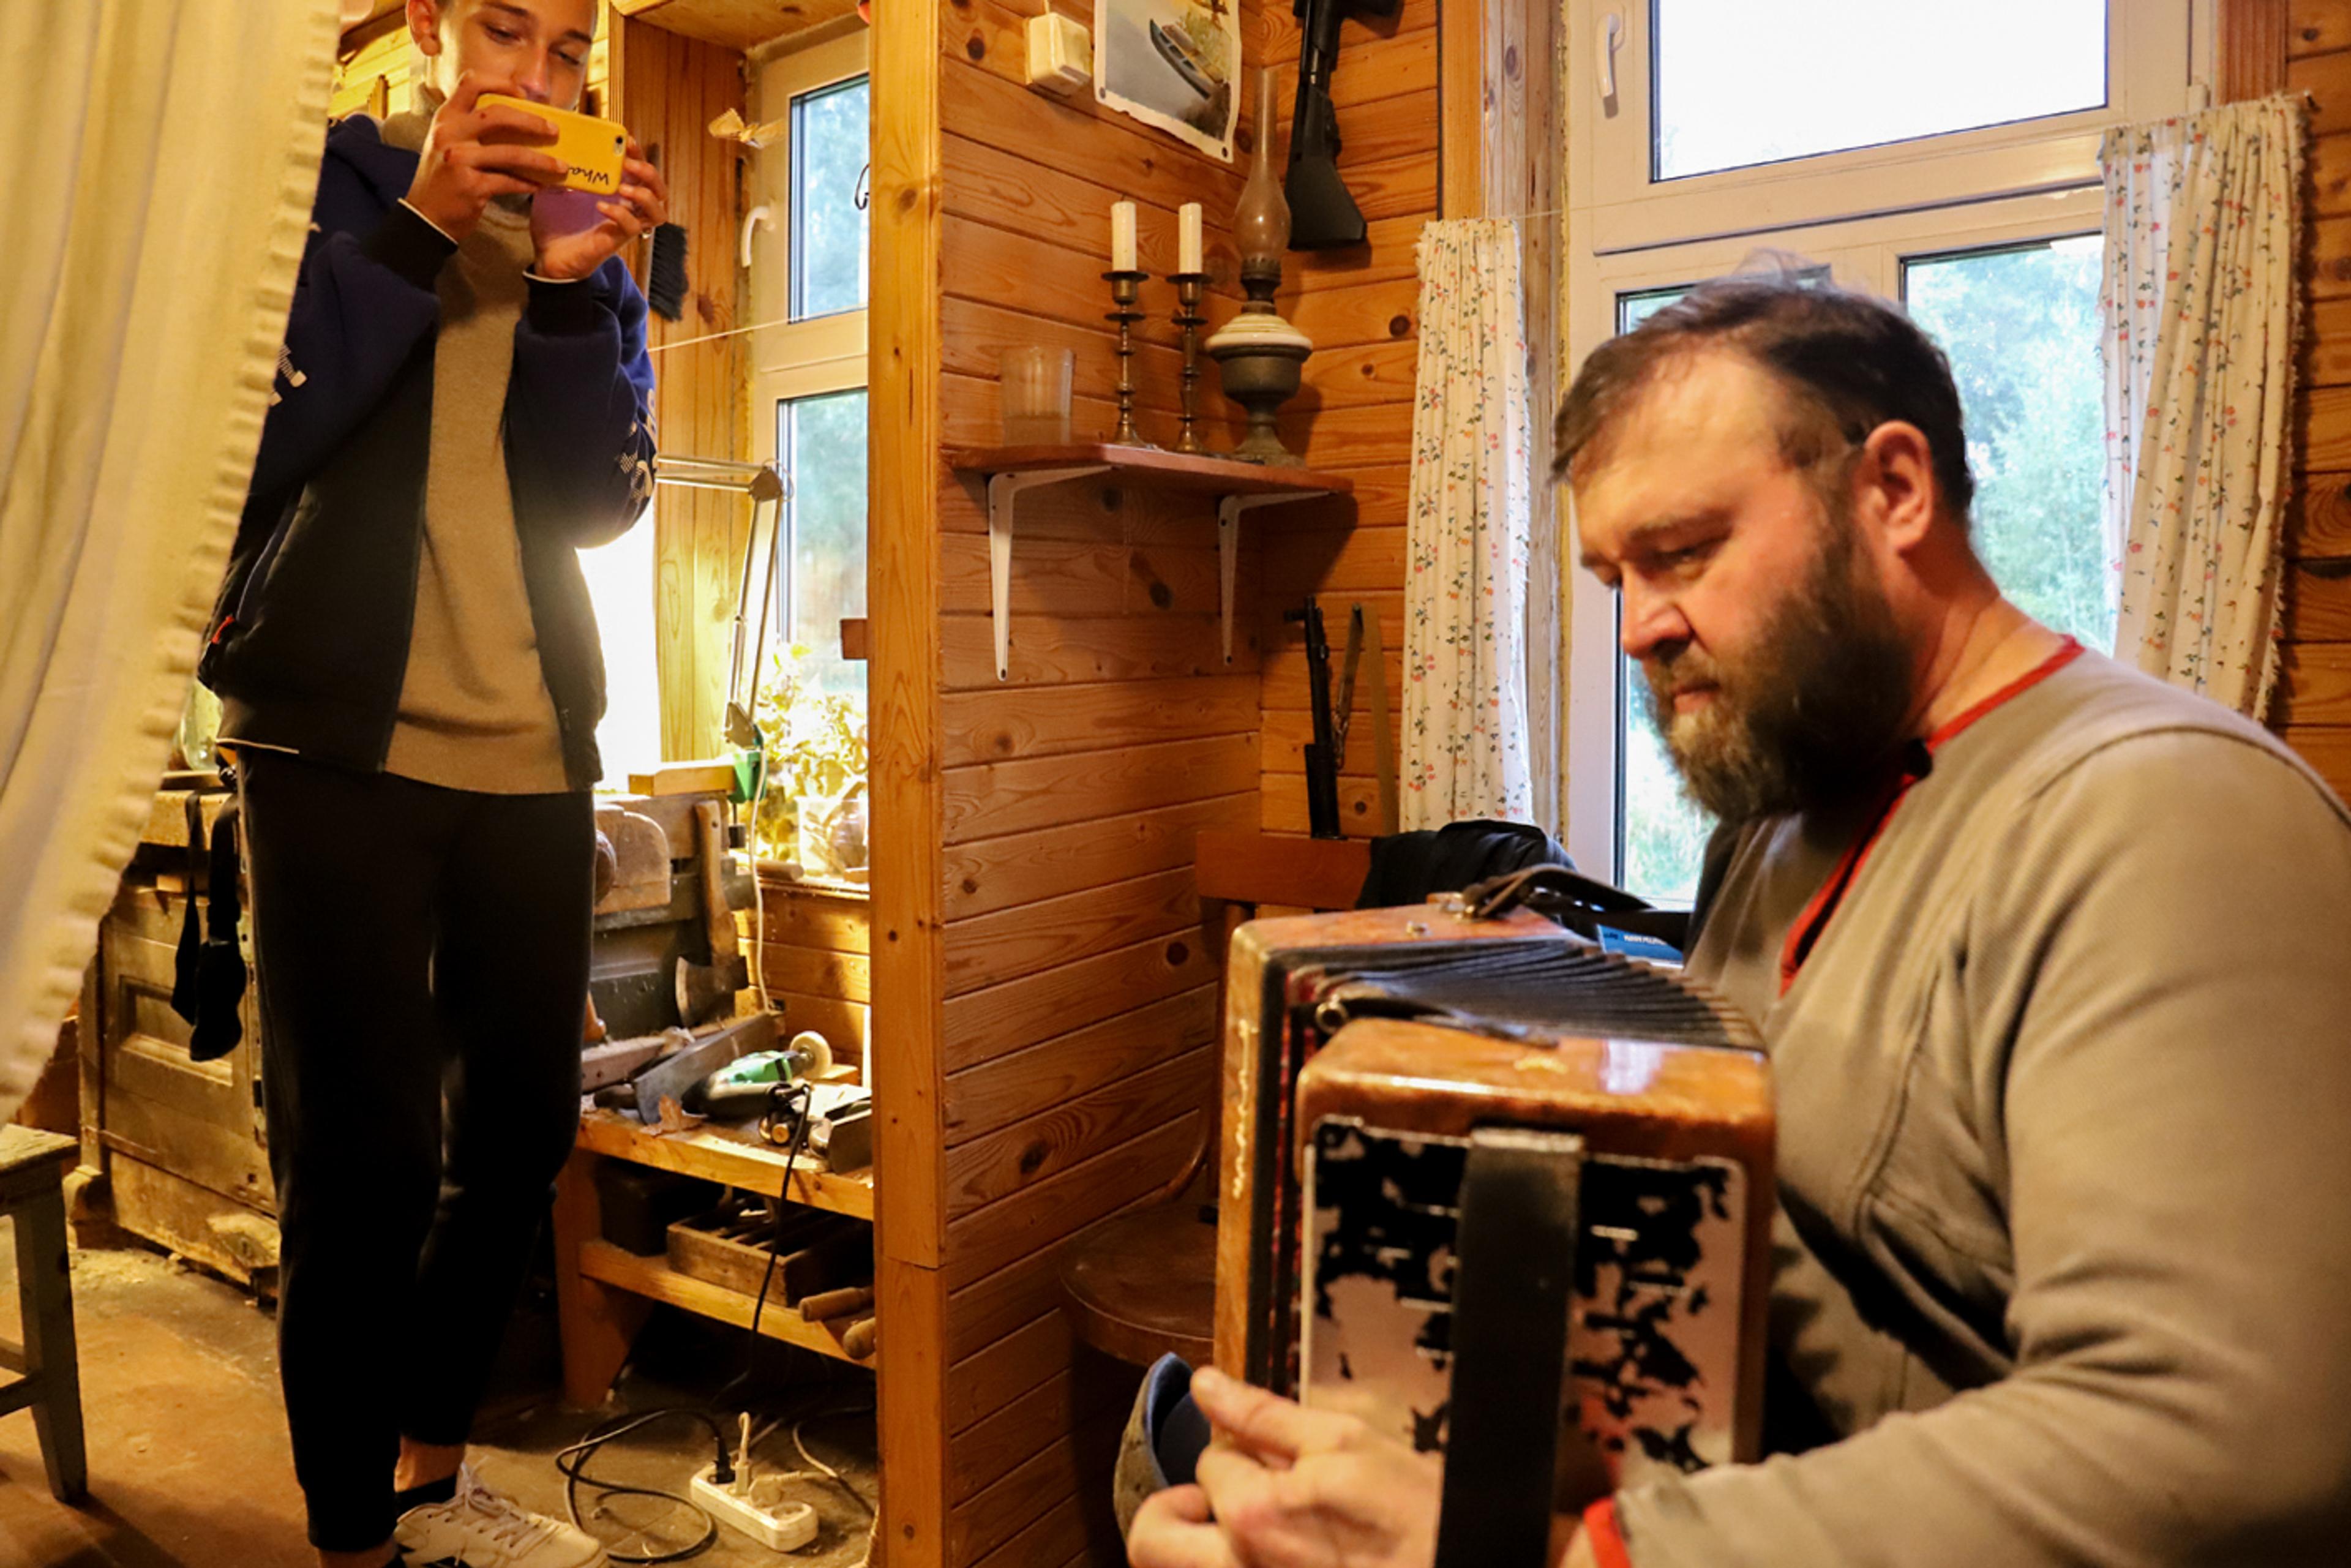 A young men with a camera is filing a bearded man, who is sitting down with a harmonica, playing music in a wooden house.